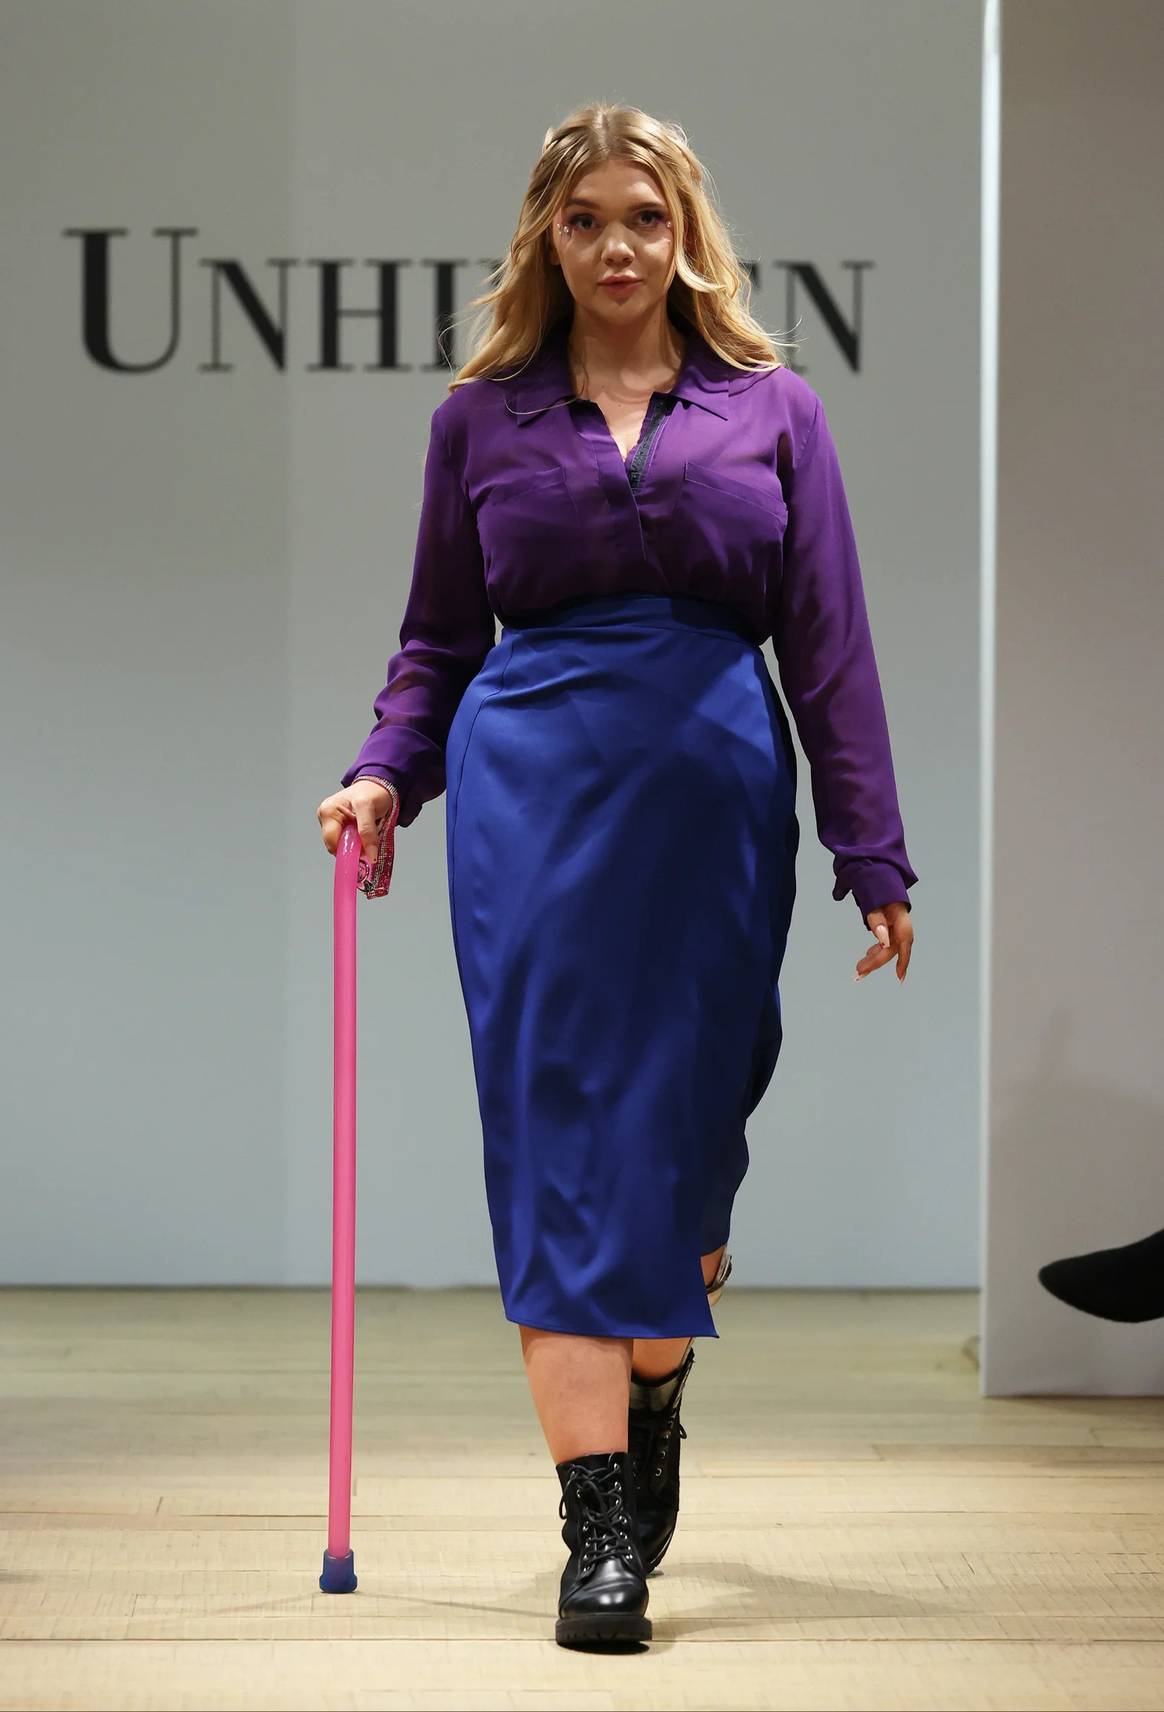 Model with walking cane in wraparound skirt in Unhidden runway show Feb 23